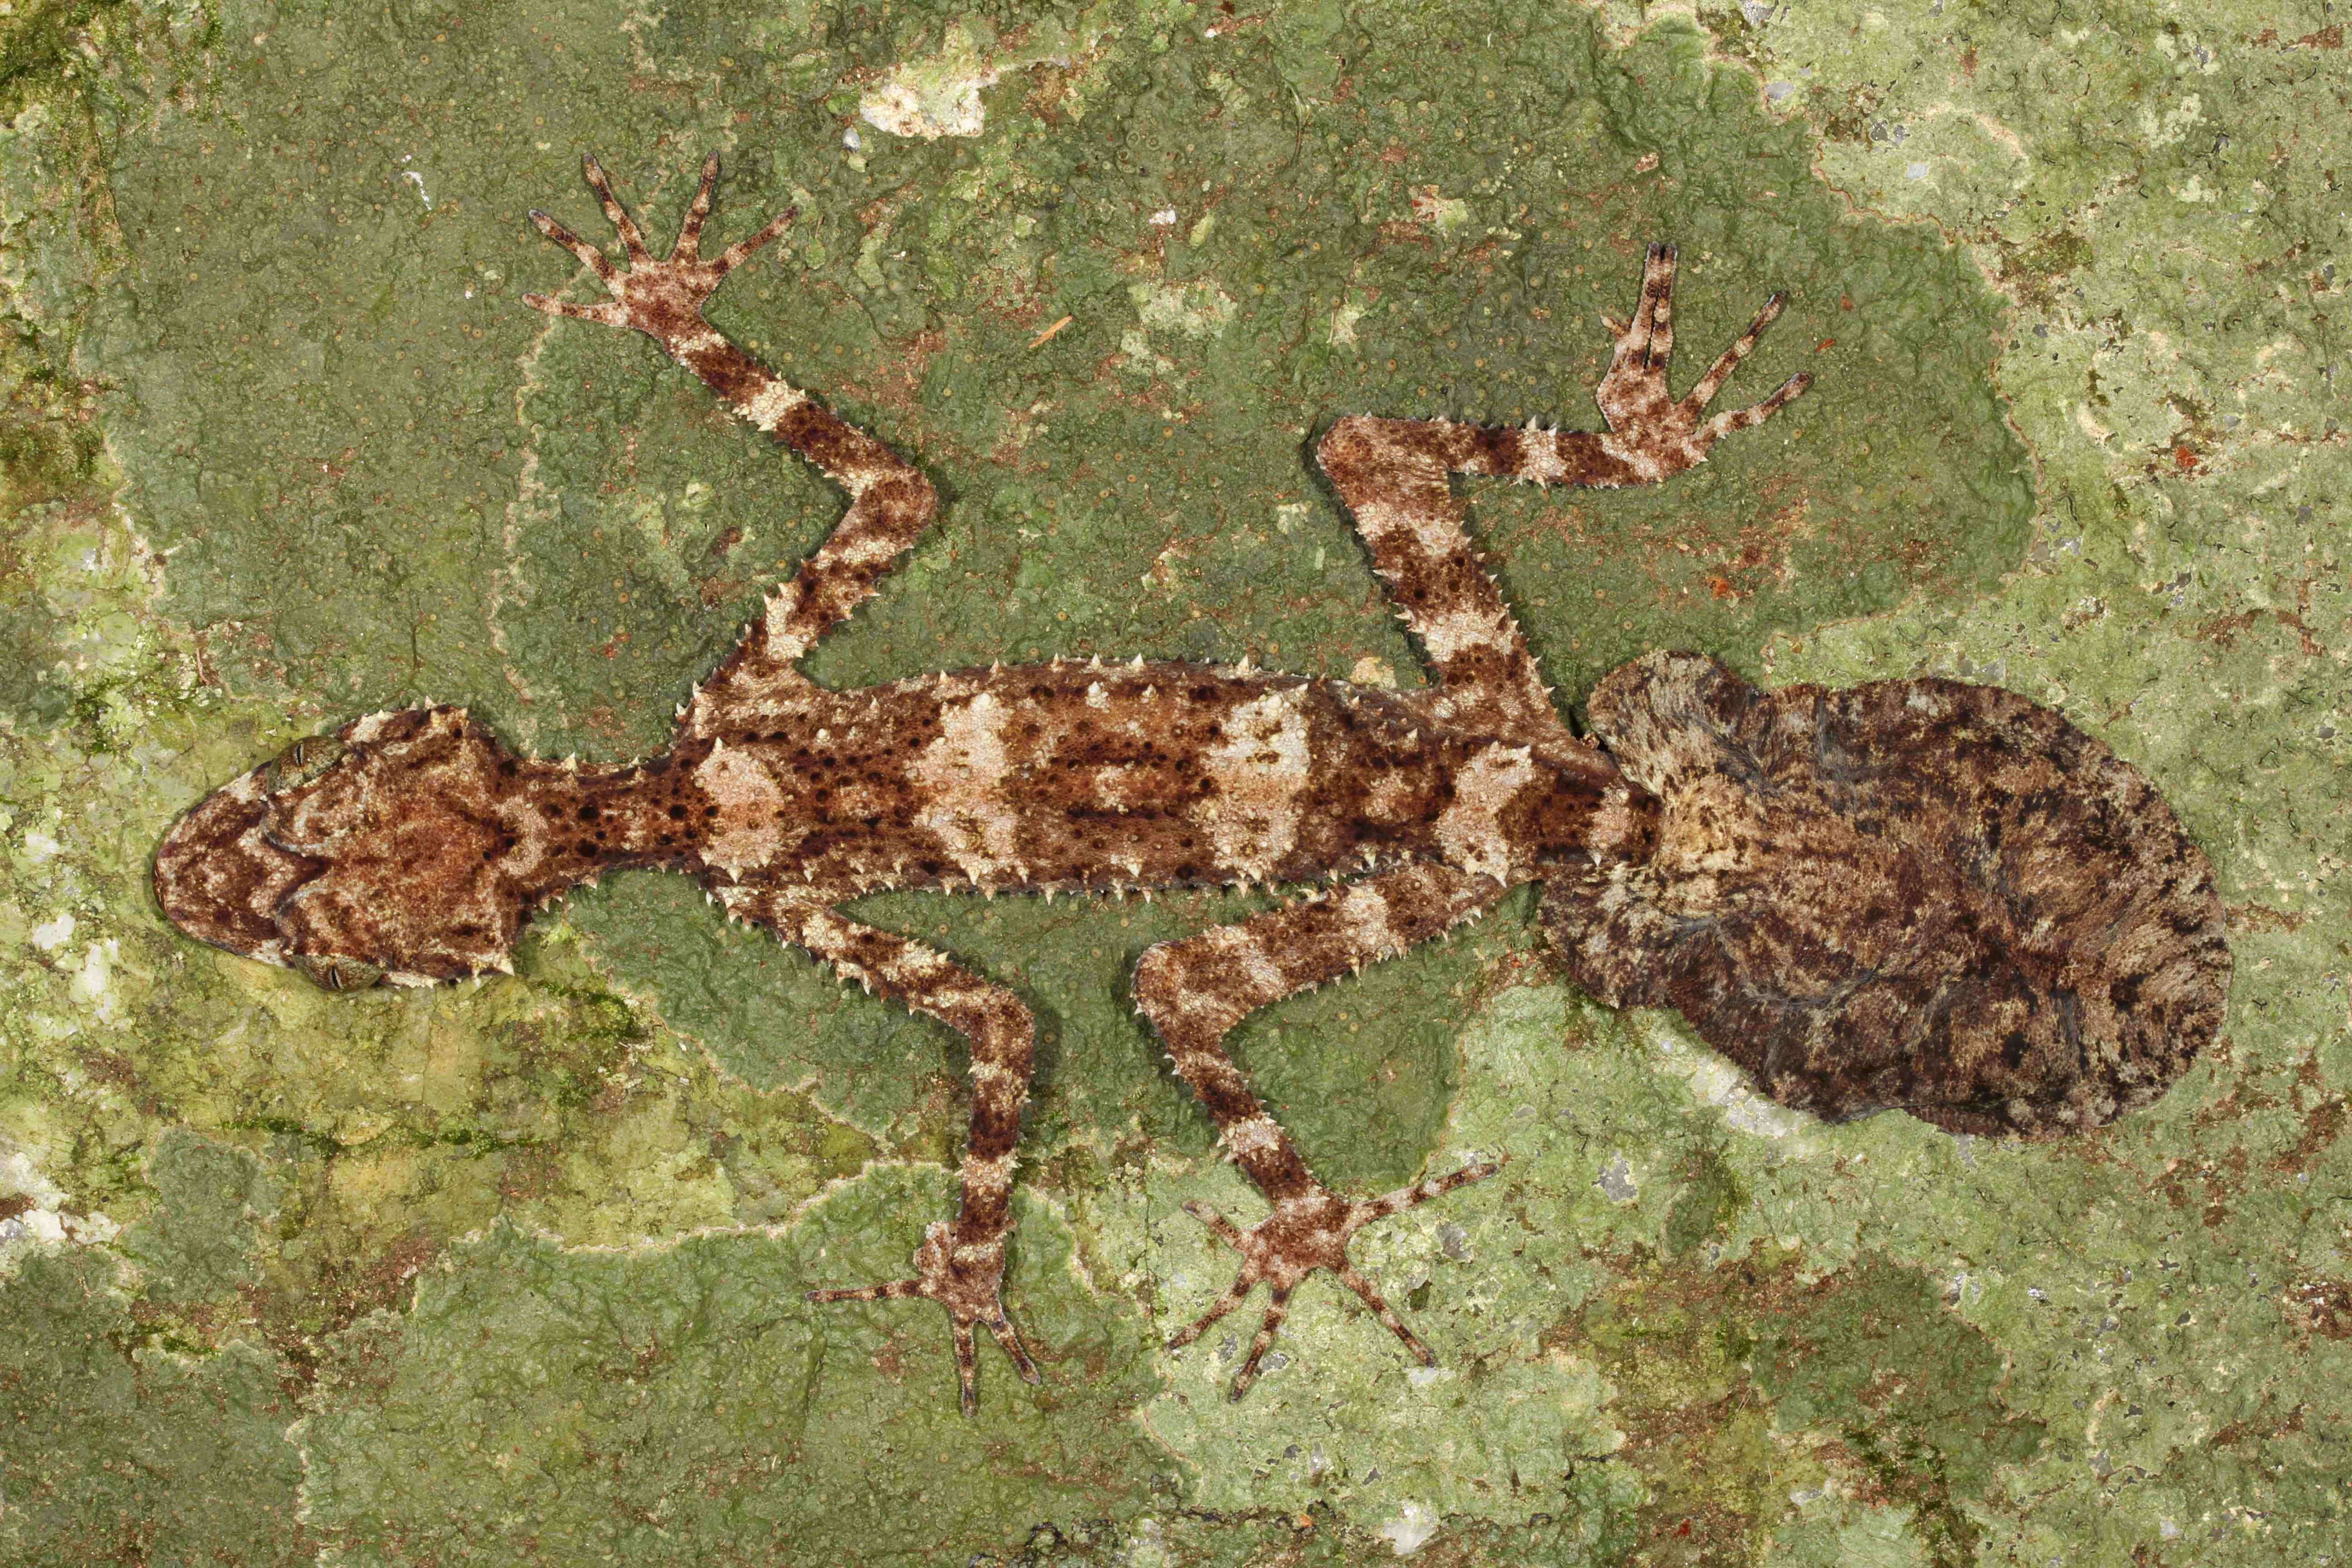 Image of Cape Melville leaf-tailed gecko